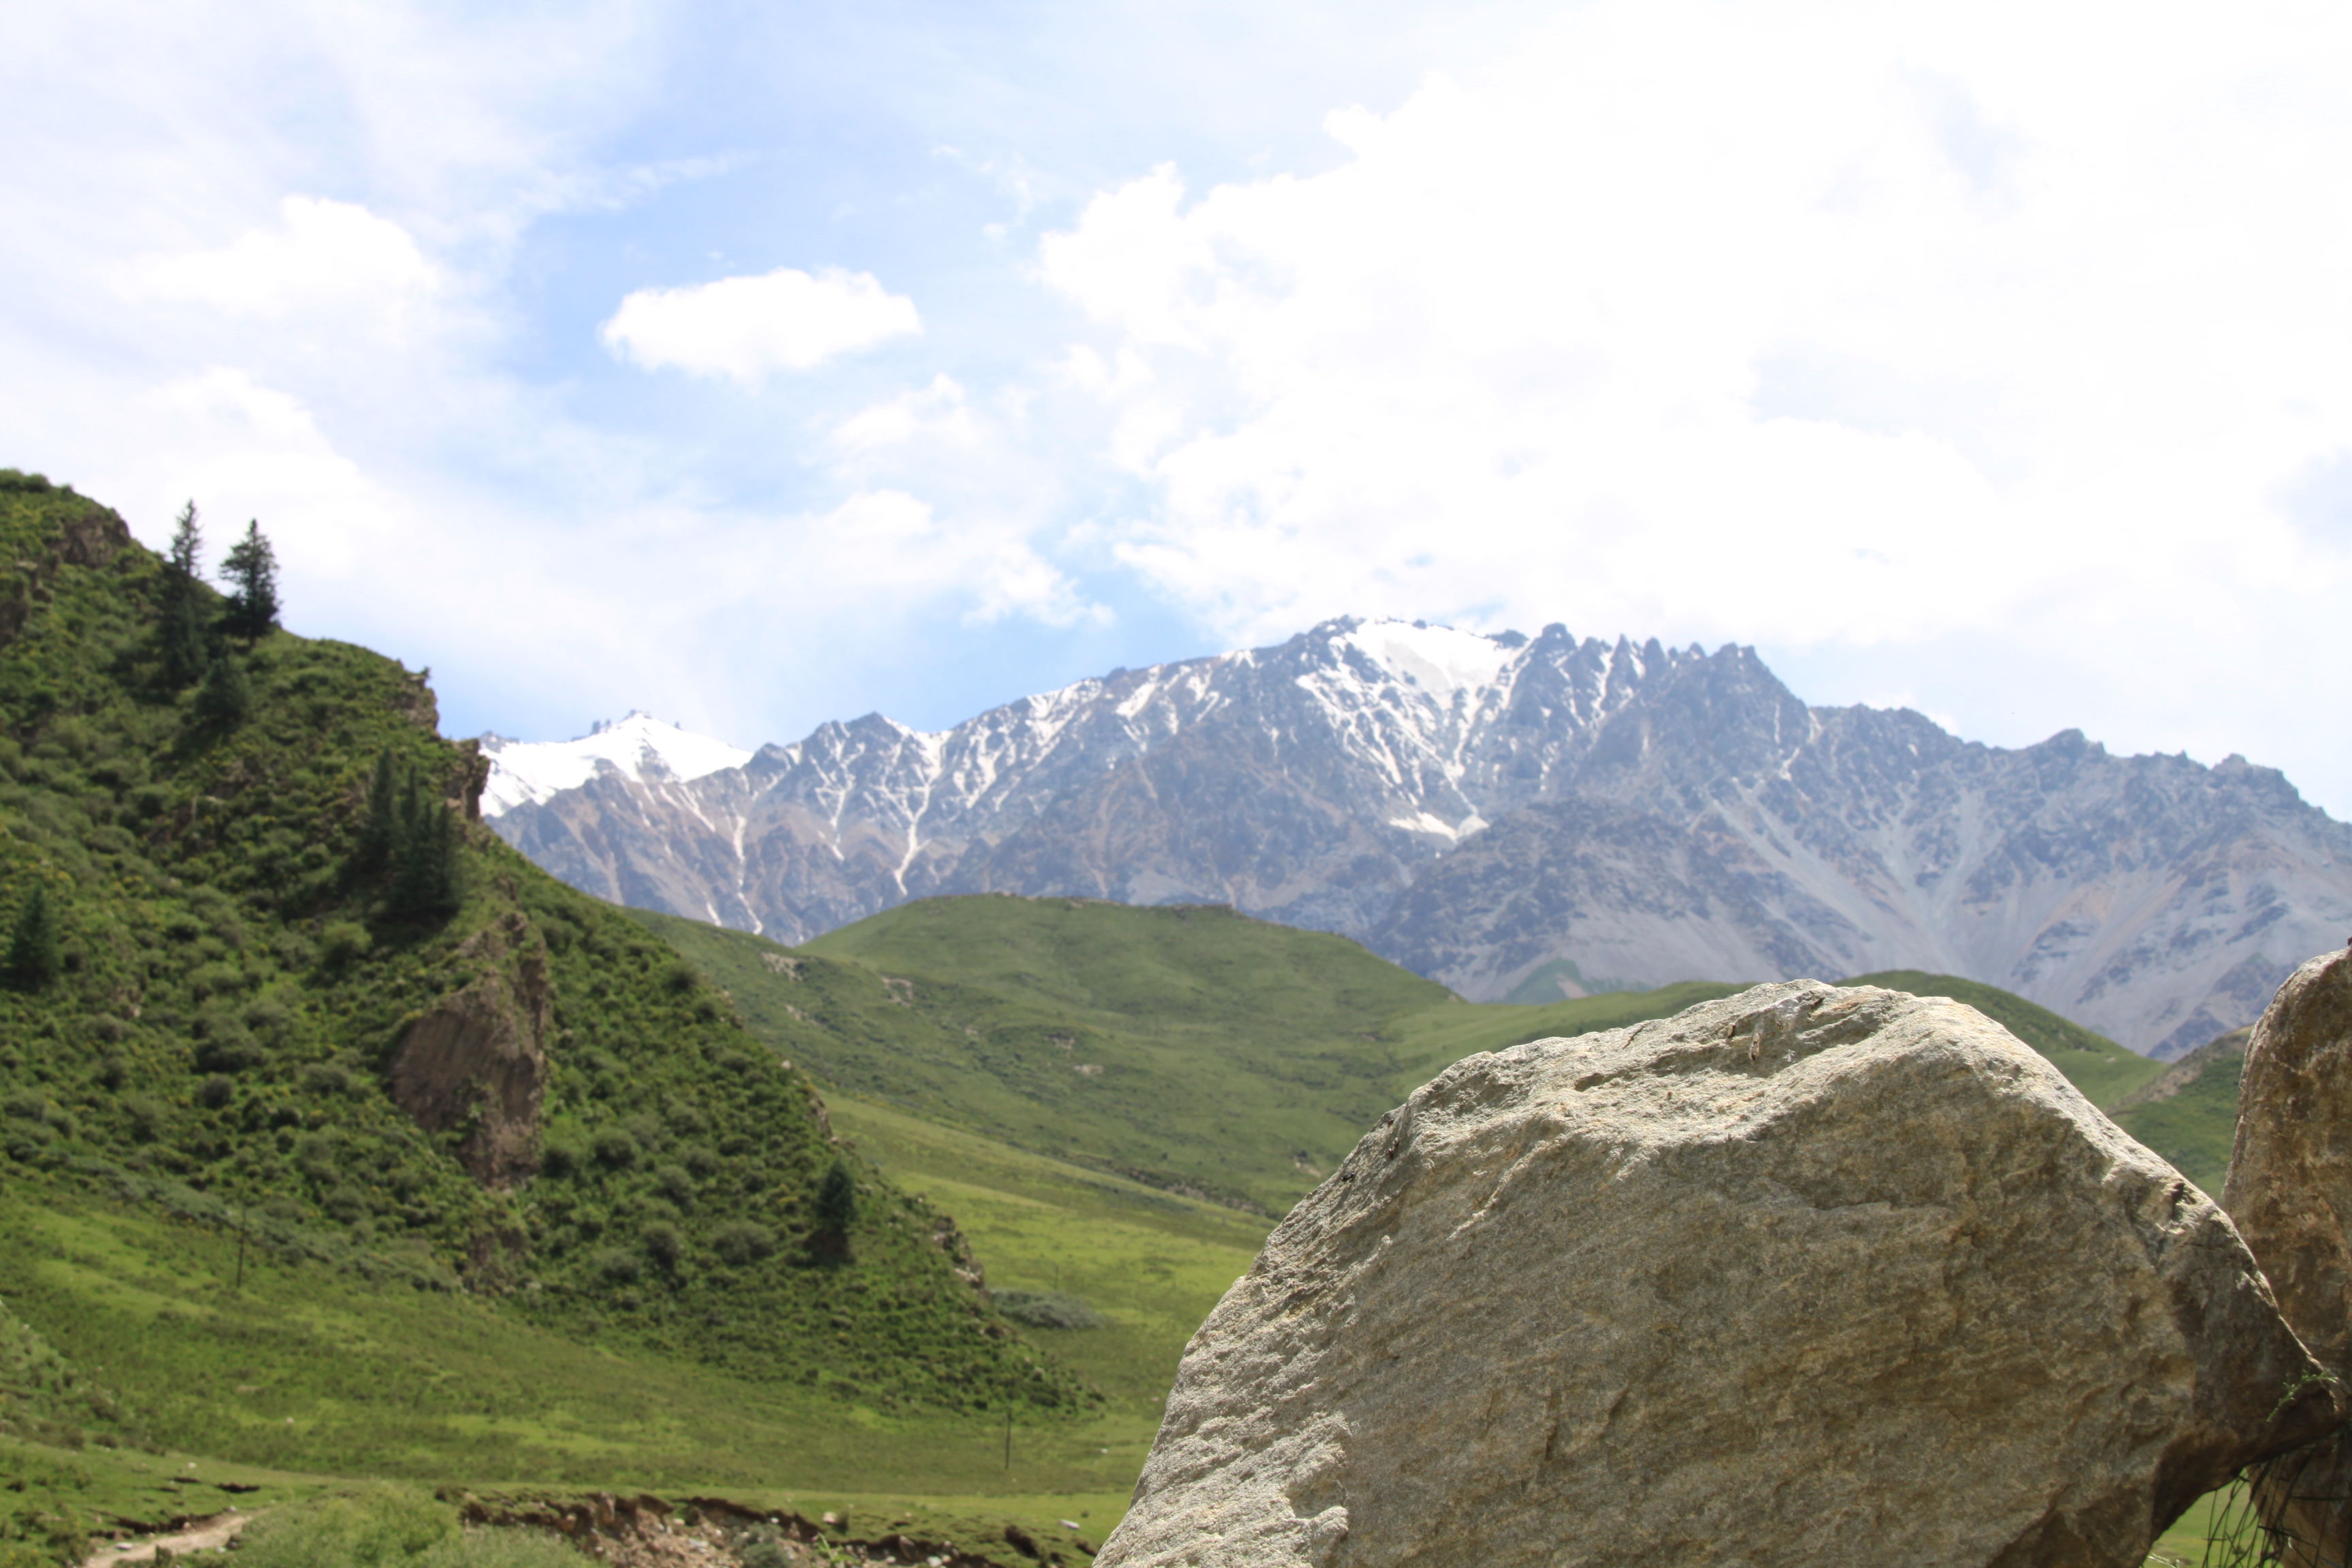 View of landscape in Qinghai